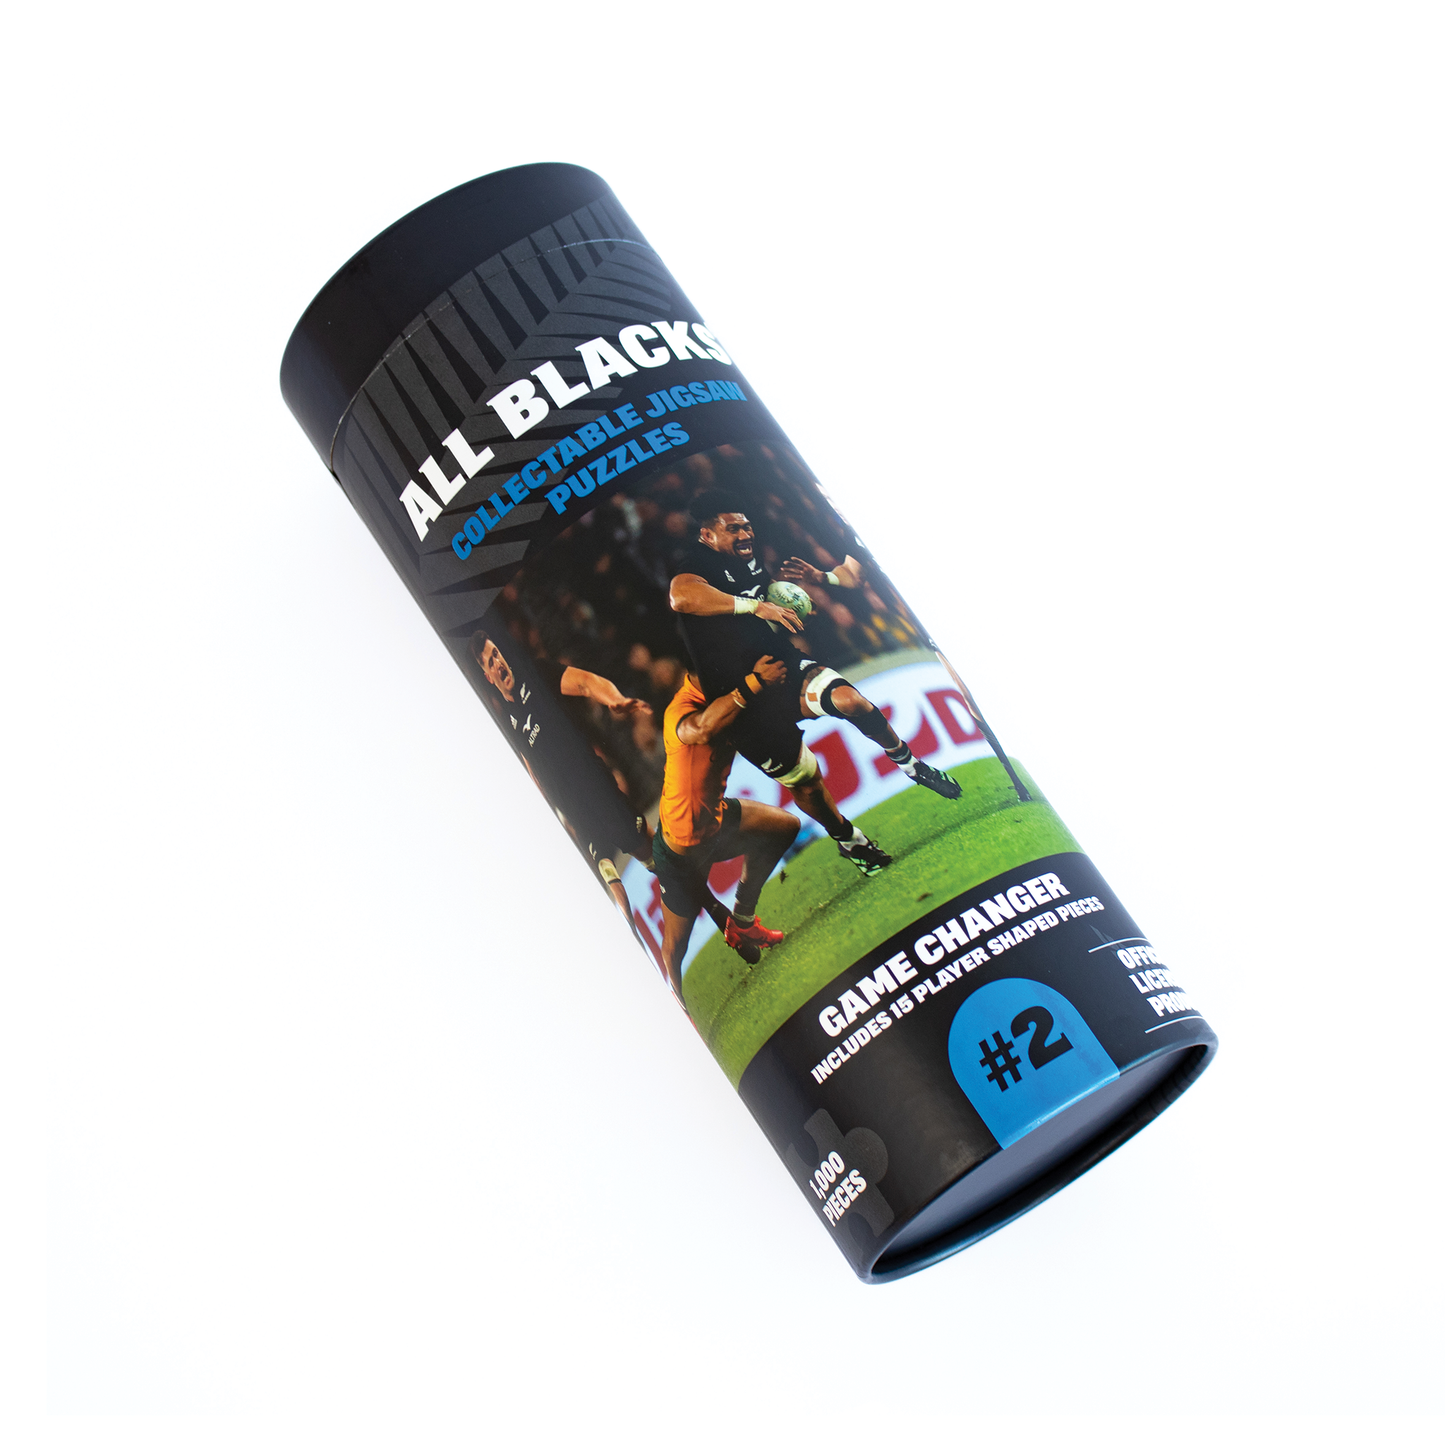 Official All Blacks Collectable Jigsaw Puzzle #2 - Game Changer